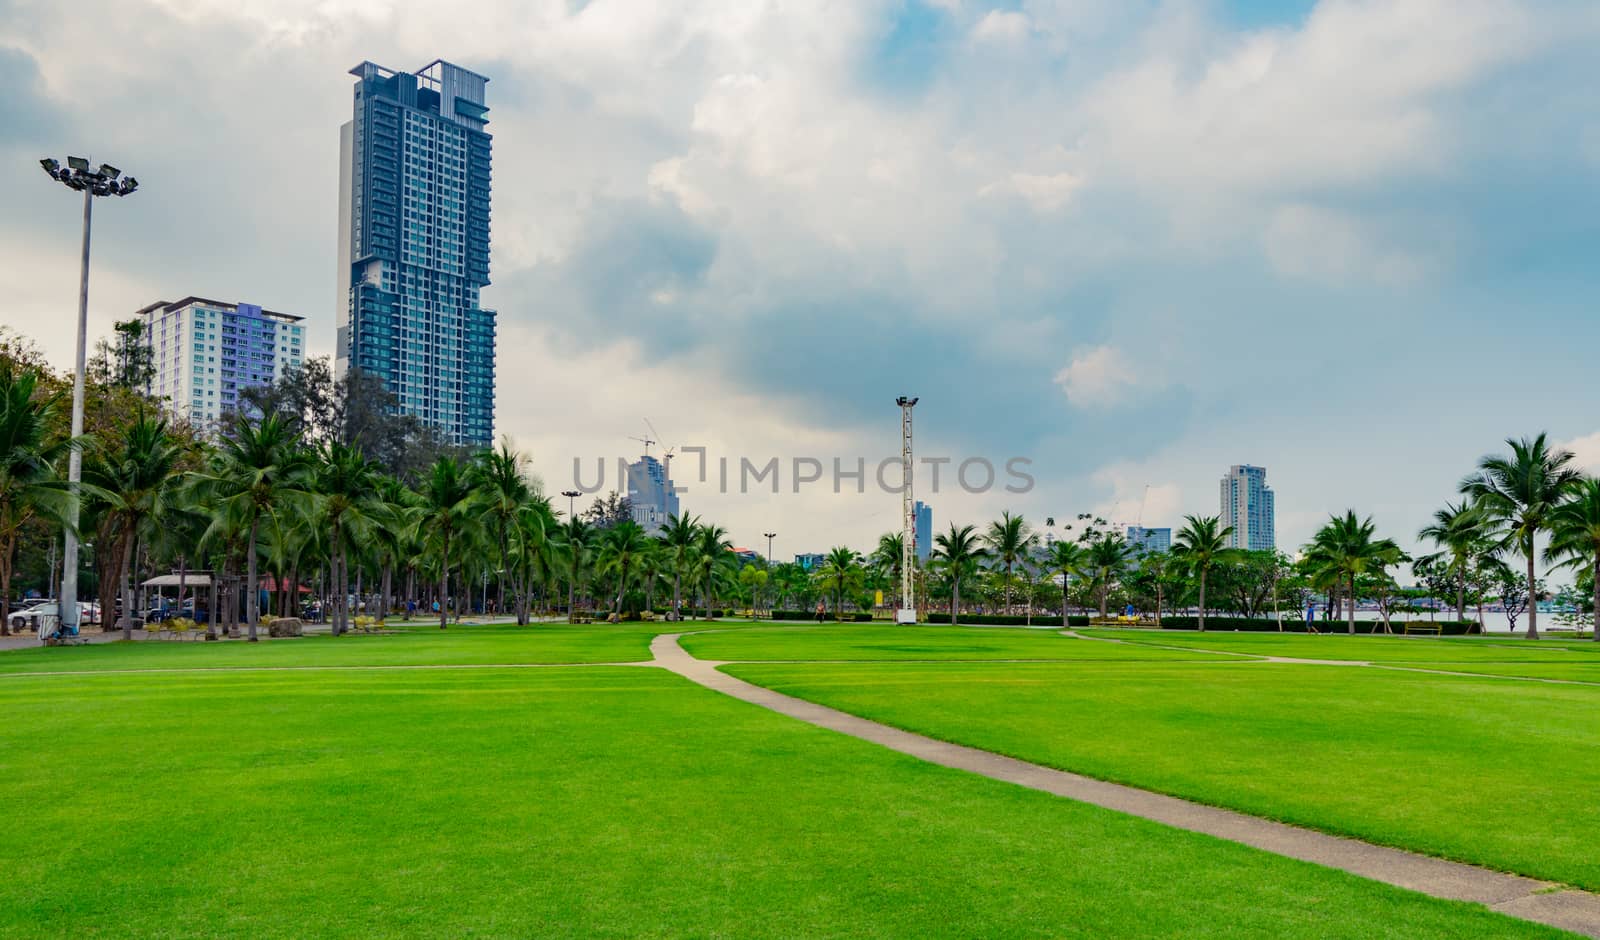 Green grass field, pedestrian road and coconut trees at the city park beside the sea. Modern building background